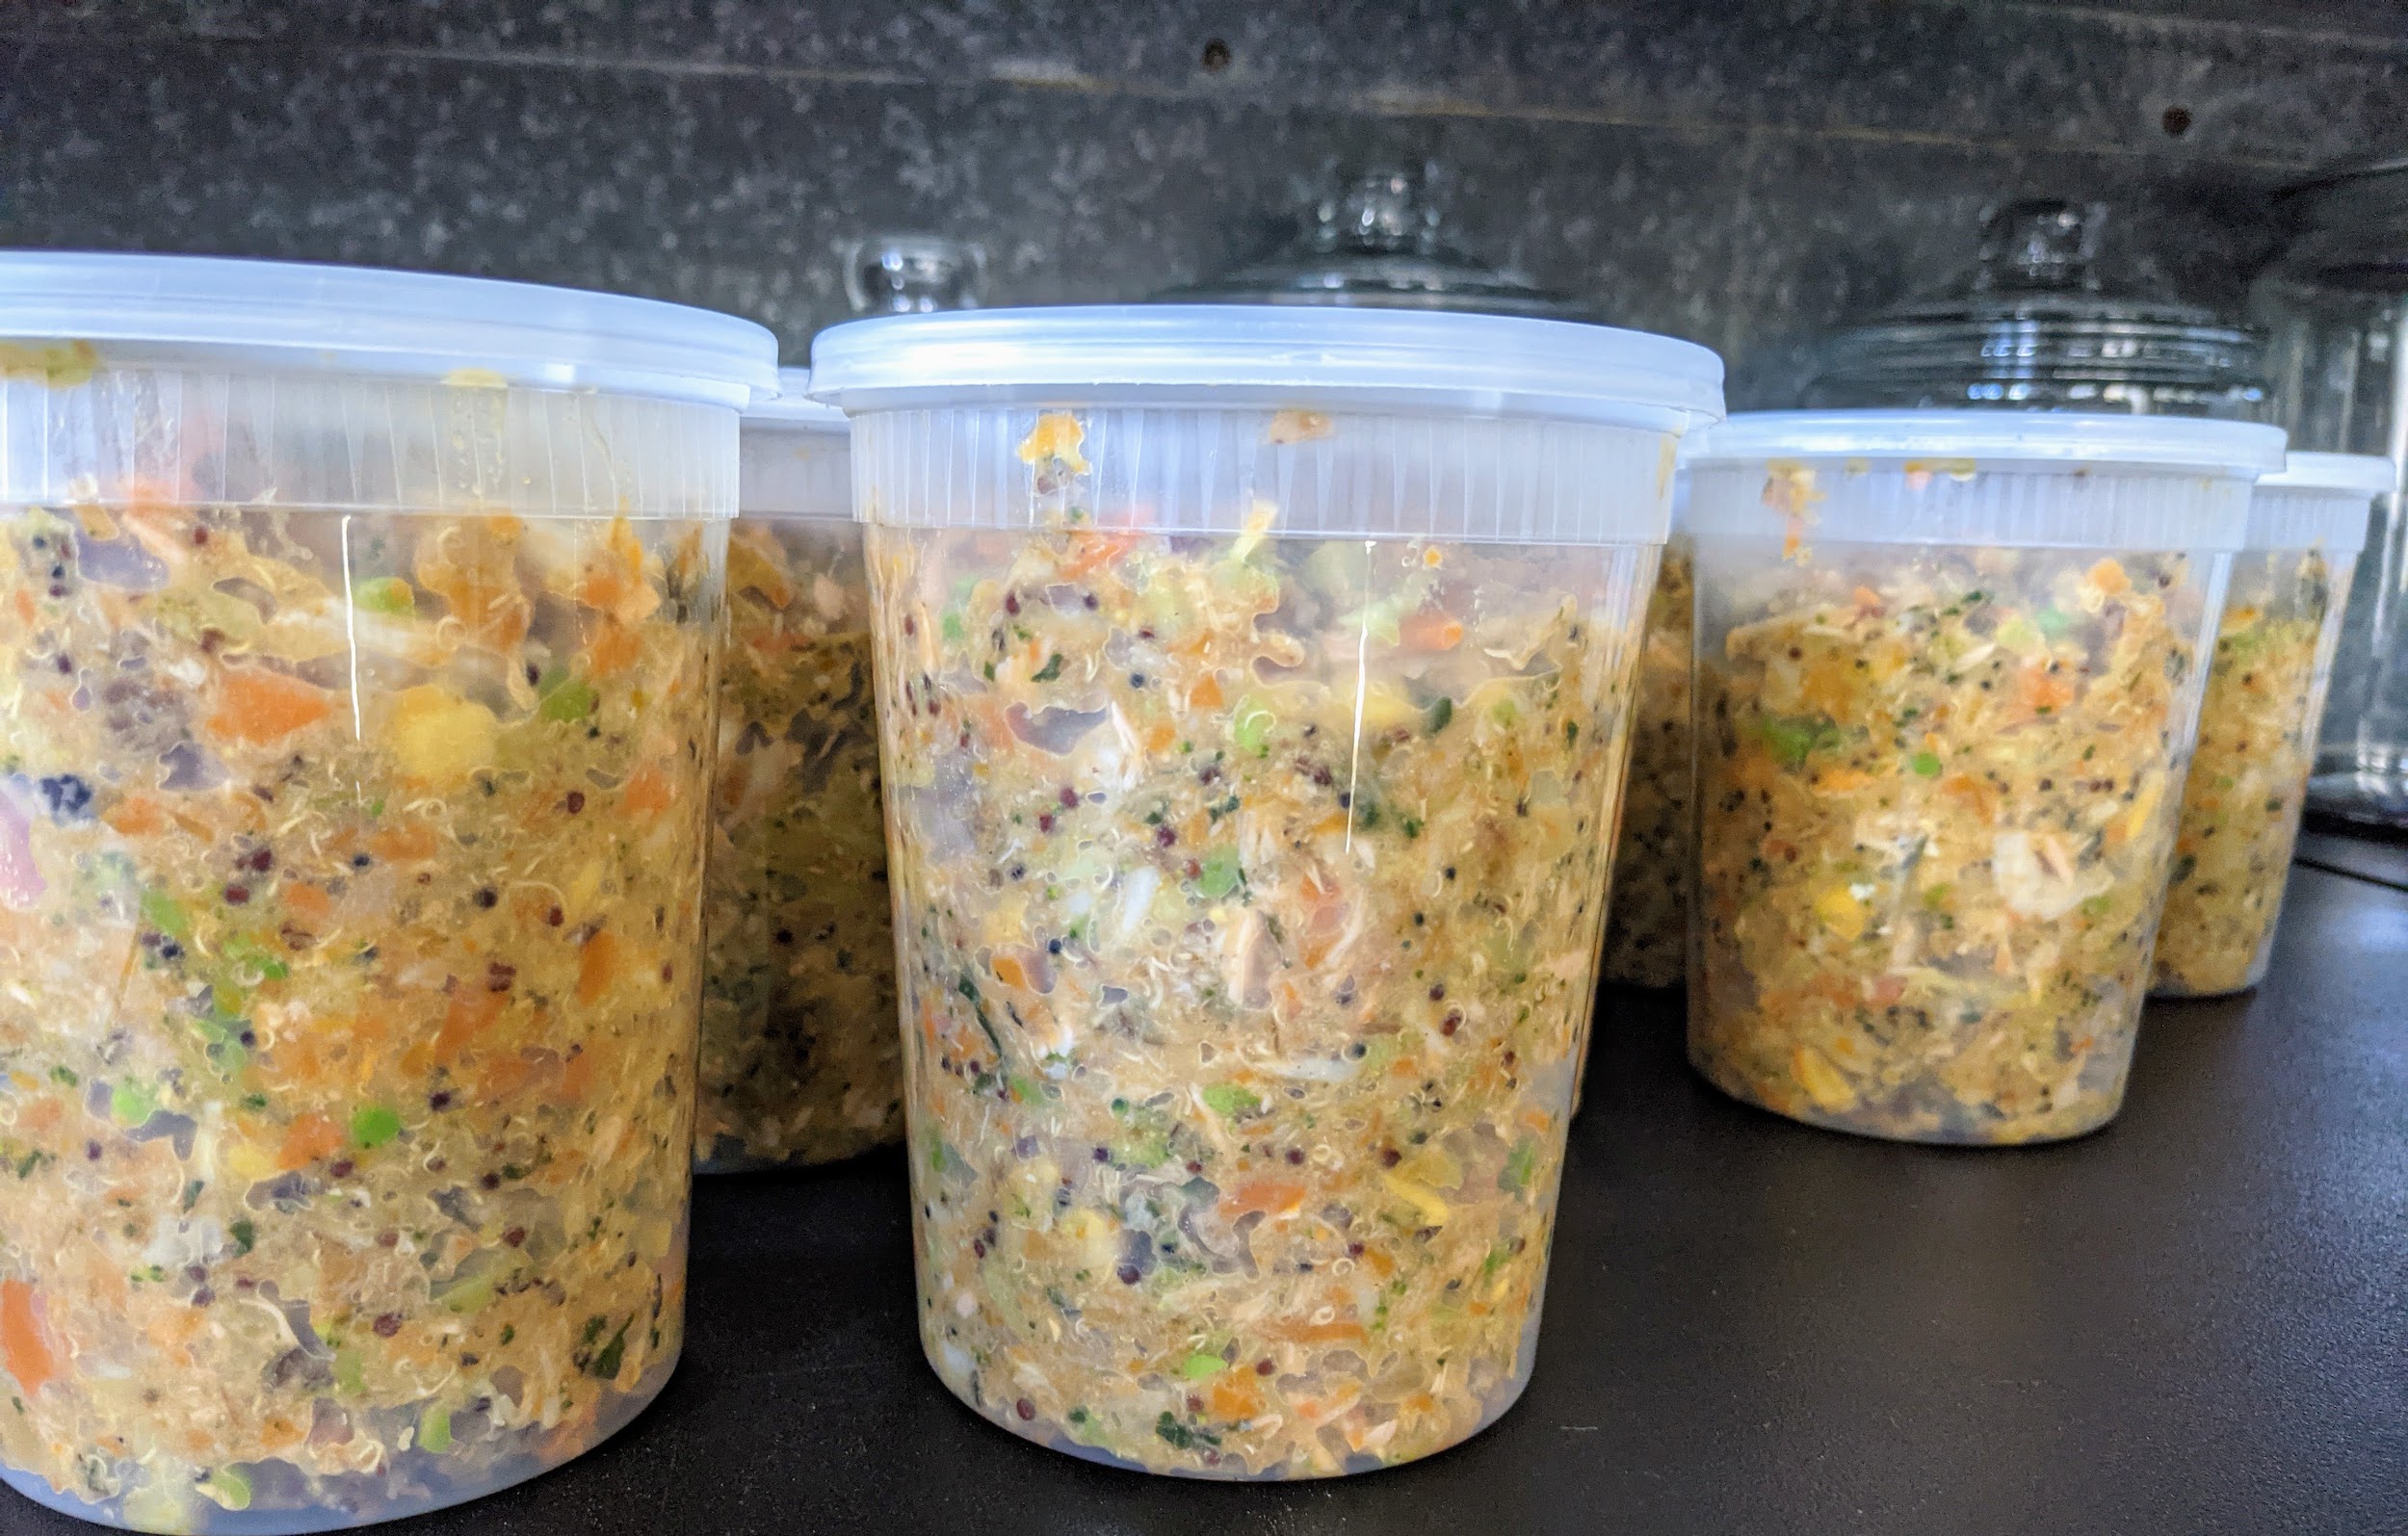 Making a Giant Batch of Food for My Dogs - The Martha Stewart Blog